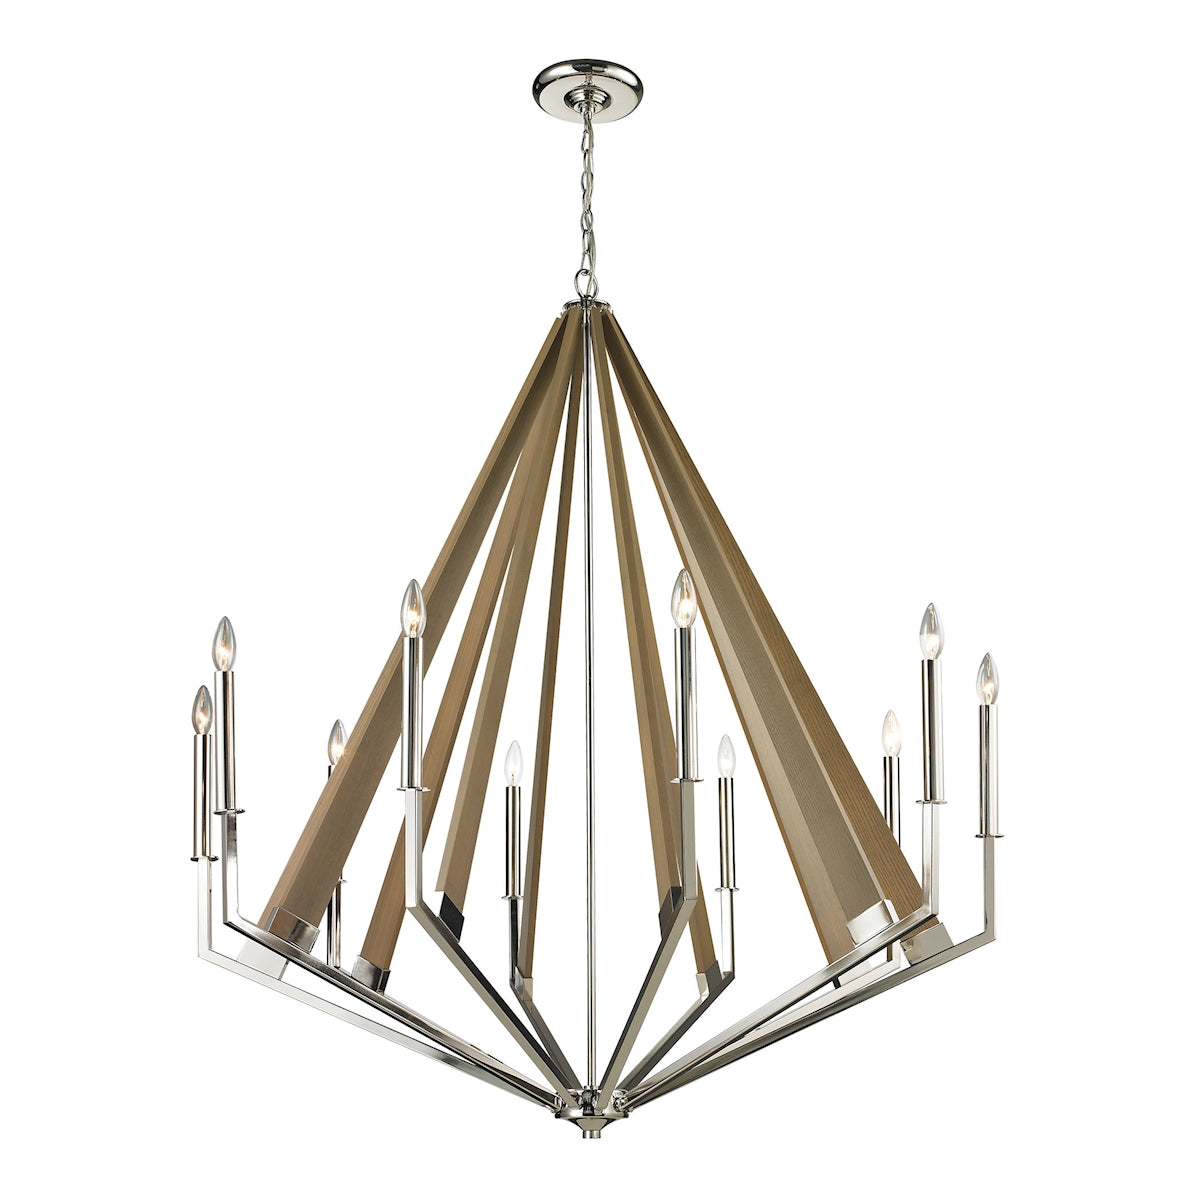 ELK Lighting 31476/10 Madera 10-Light Chandelier in Polished Nickel and Taupe